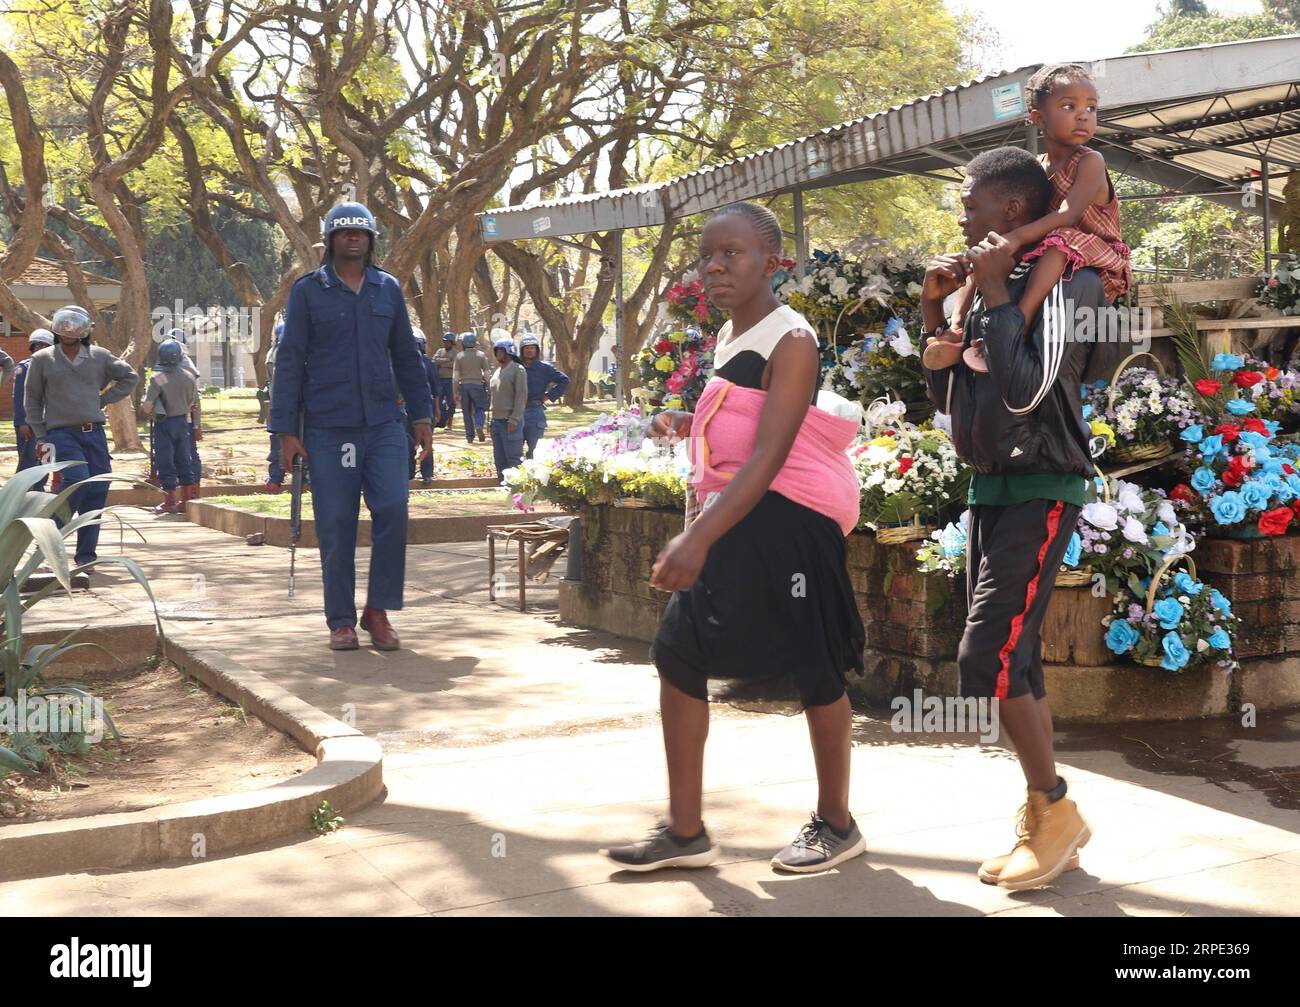 News Bilder des Tages (190816) -- HARARE, Aug. 16, 2019 (Xinhua) -- Police officers patrol in Harare, Zimbabwe, on Aug. 16, 2019. Shops, banks and retail outlets in Zimbabwe s capital Harare were closed on Friday after the High Court banned a planned demonstration by the opposition MDC Alliance. Heavily armed police officers patrolled the central business district while some were stationed at strategic areas in the city center, including at Africa Unity Square where protesters were due to congregate. (Photo by Shaun Jusa/Xinhua) ZIMBABWE-HARARE-PROTEST-POLICE PUBLICATIONxNOTxINxCHN Stock Photo